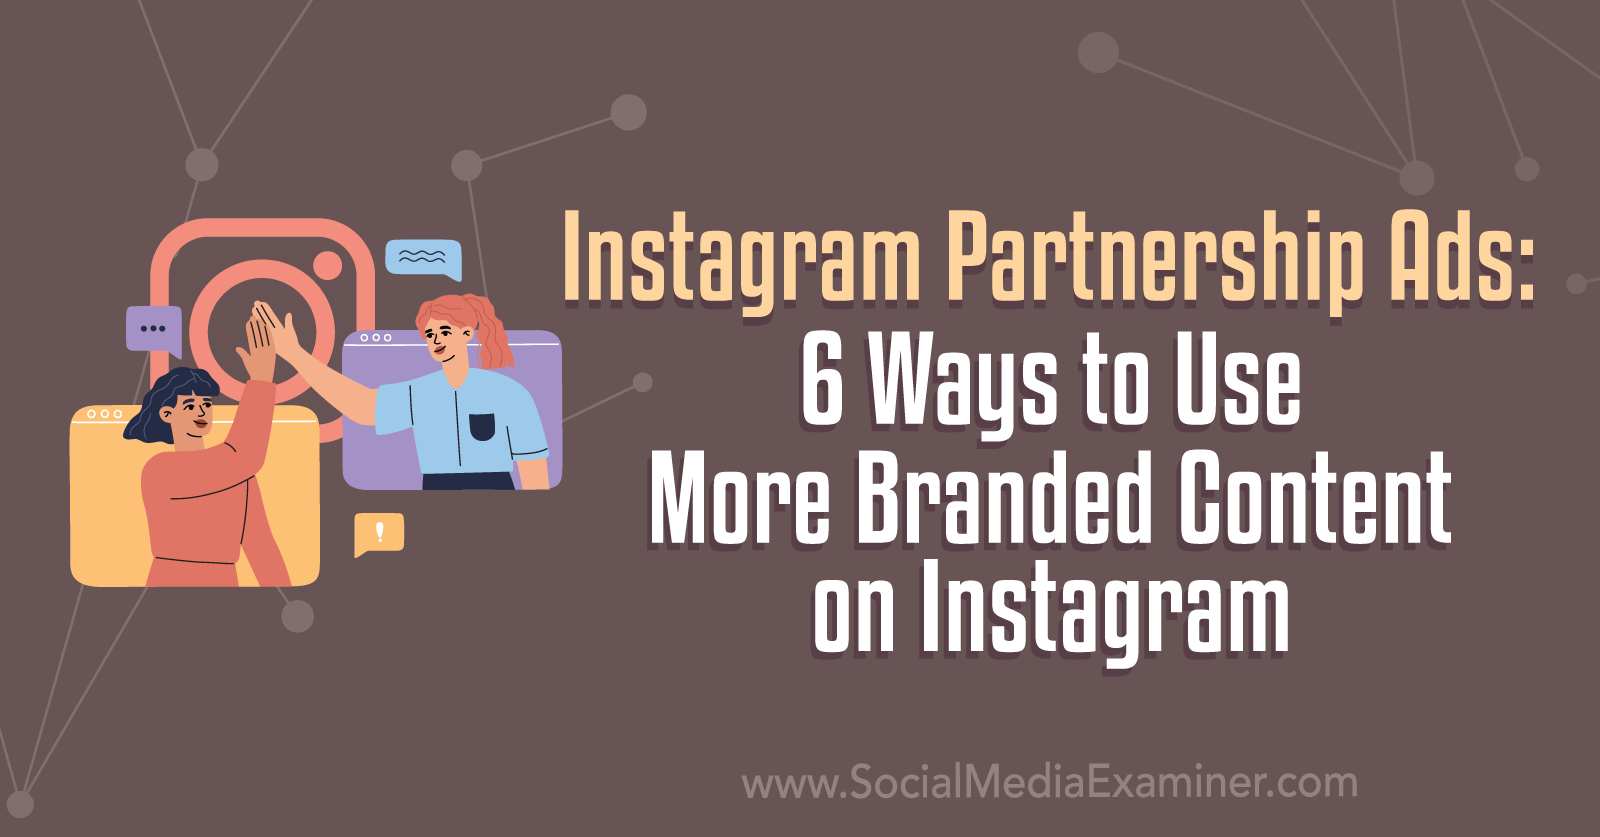 Instagram Partnership Ads: 6 Ways to Use More Branded Content on Instagram by Social Media Examiner